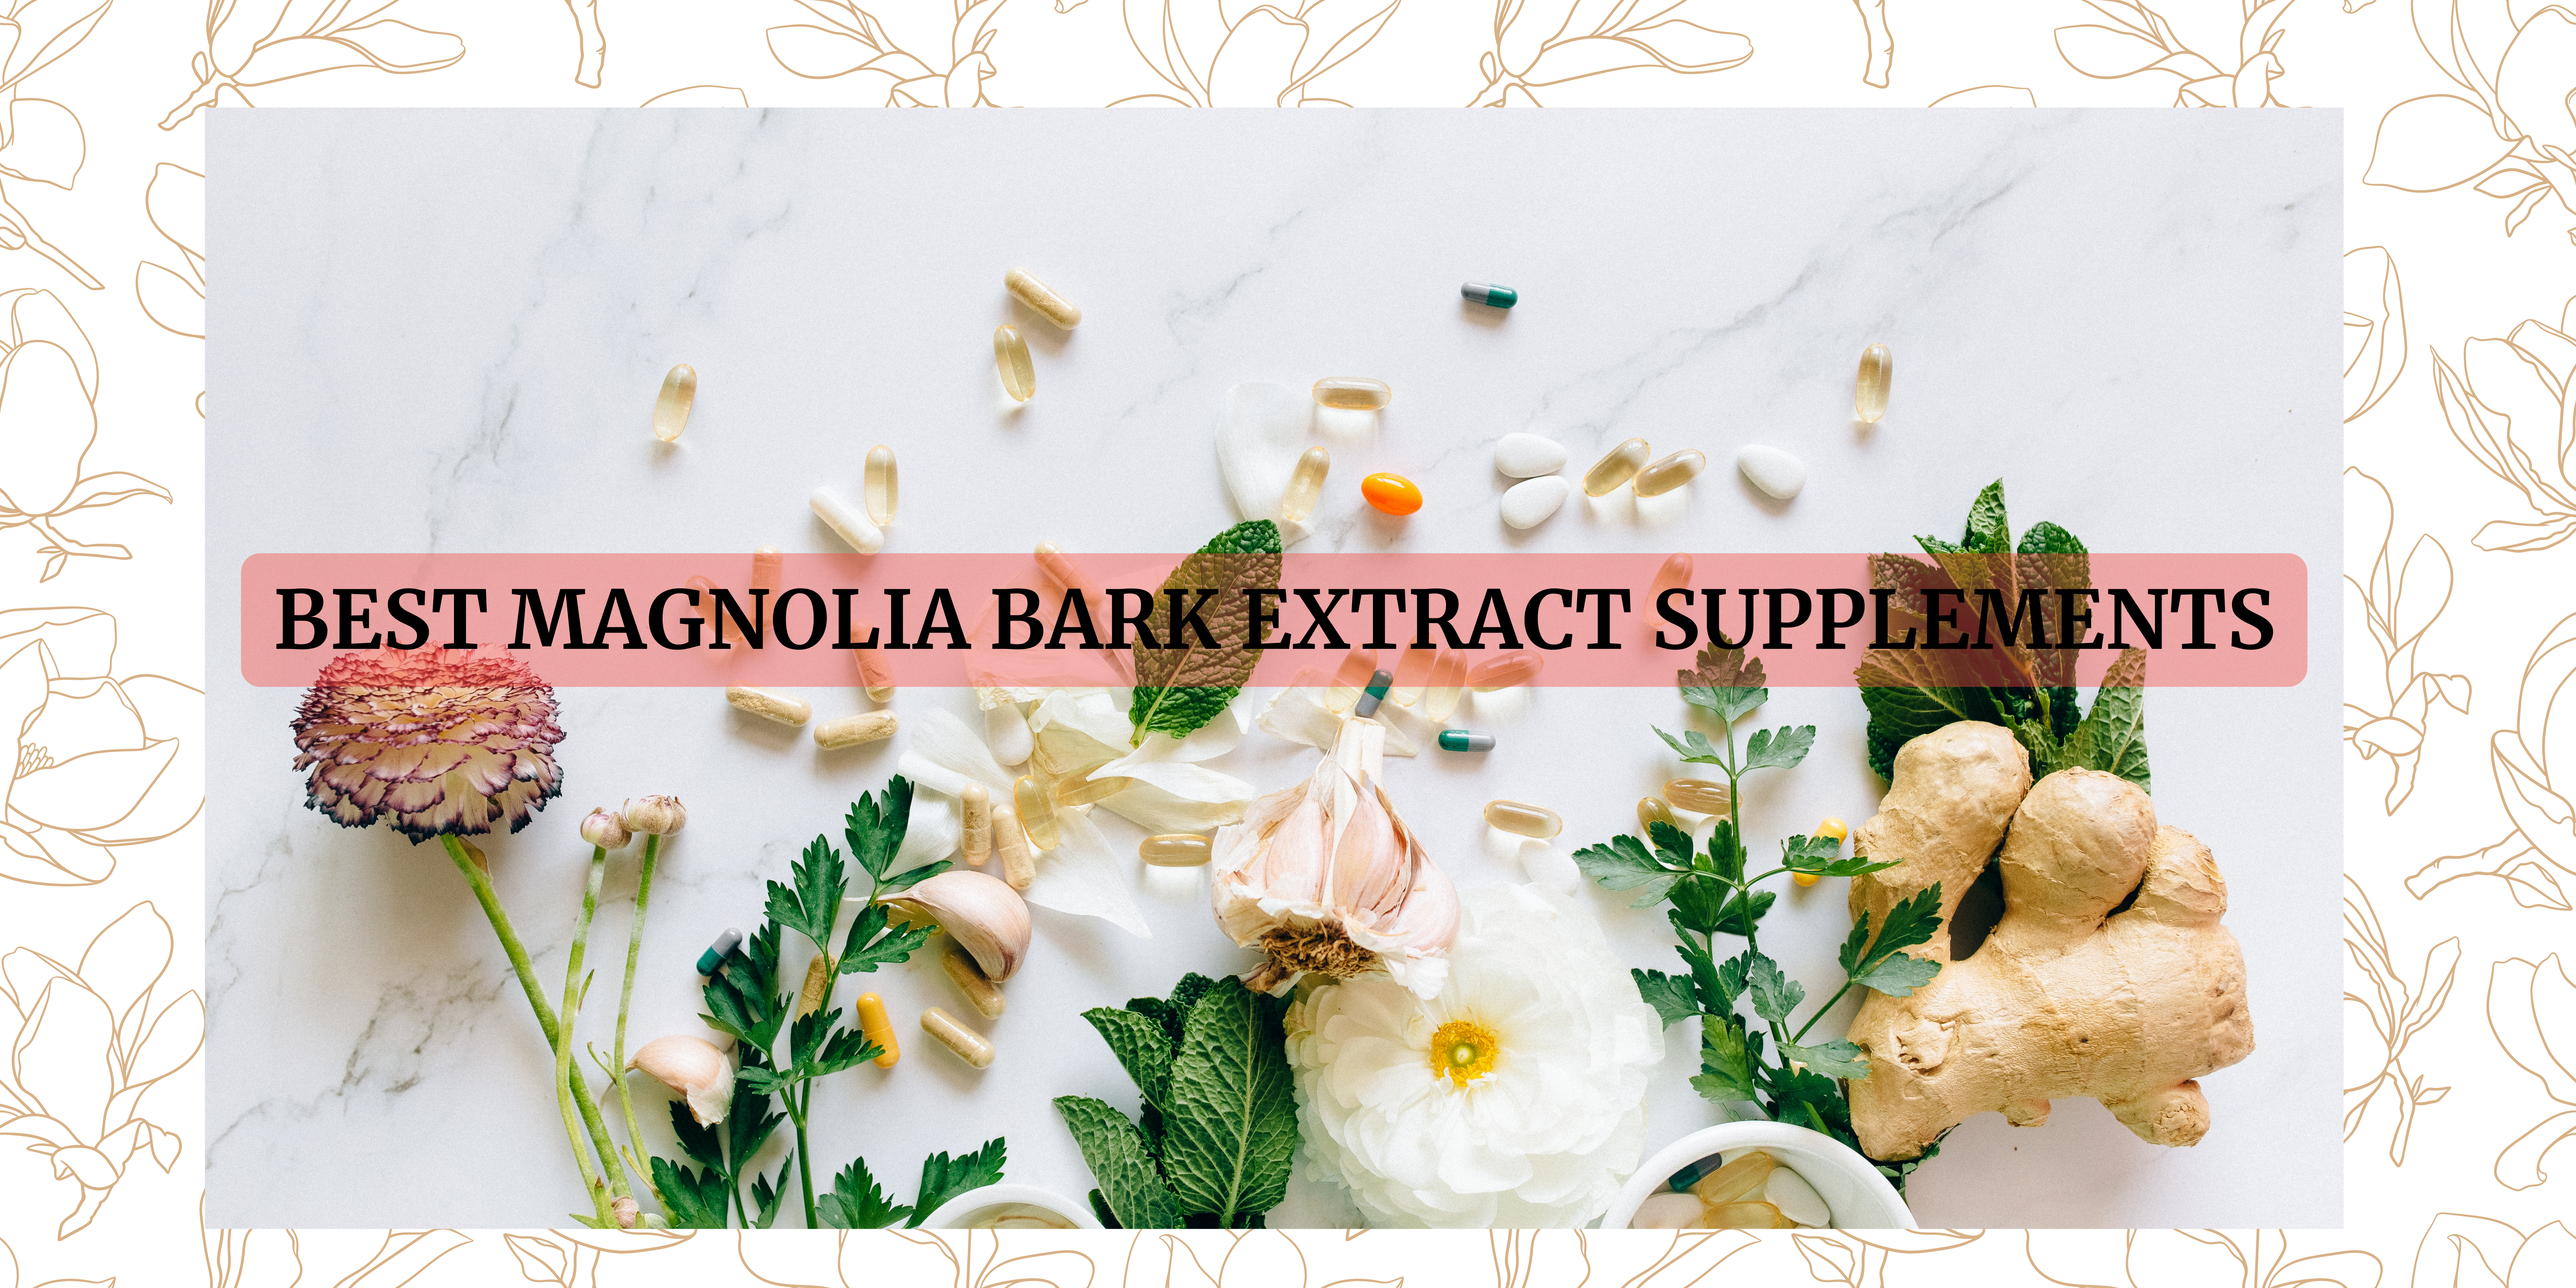 magnolia bark extract supplements in USA